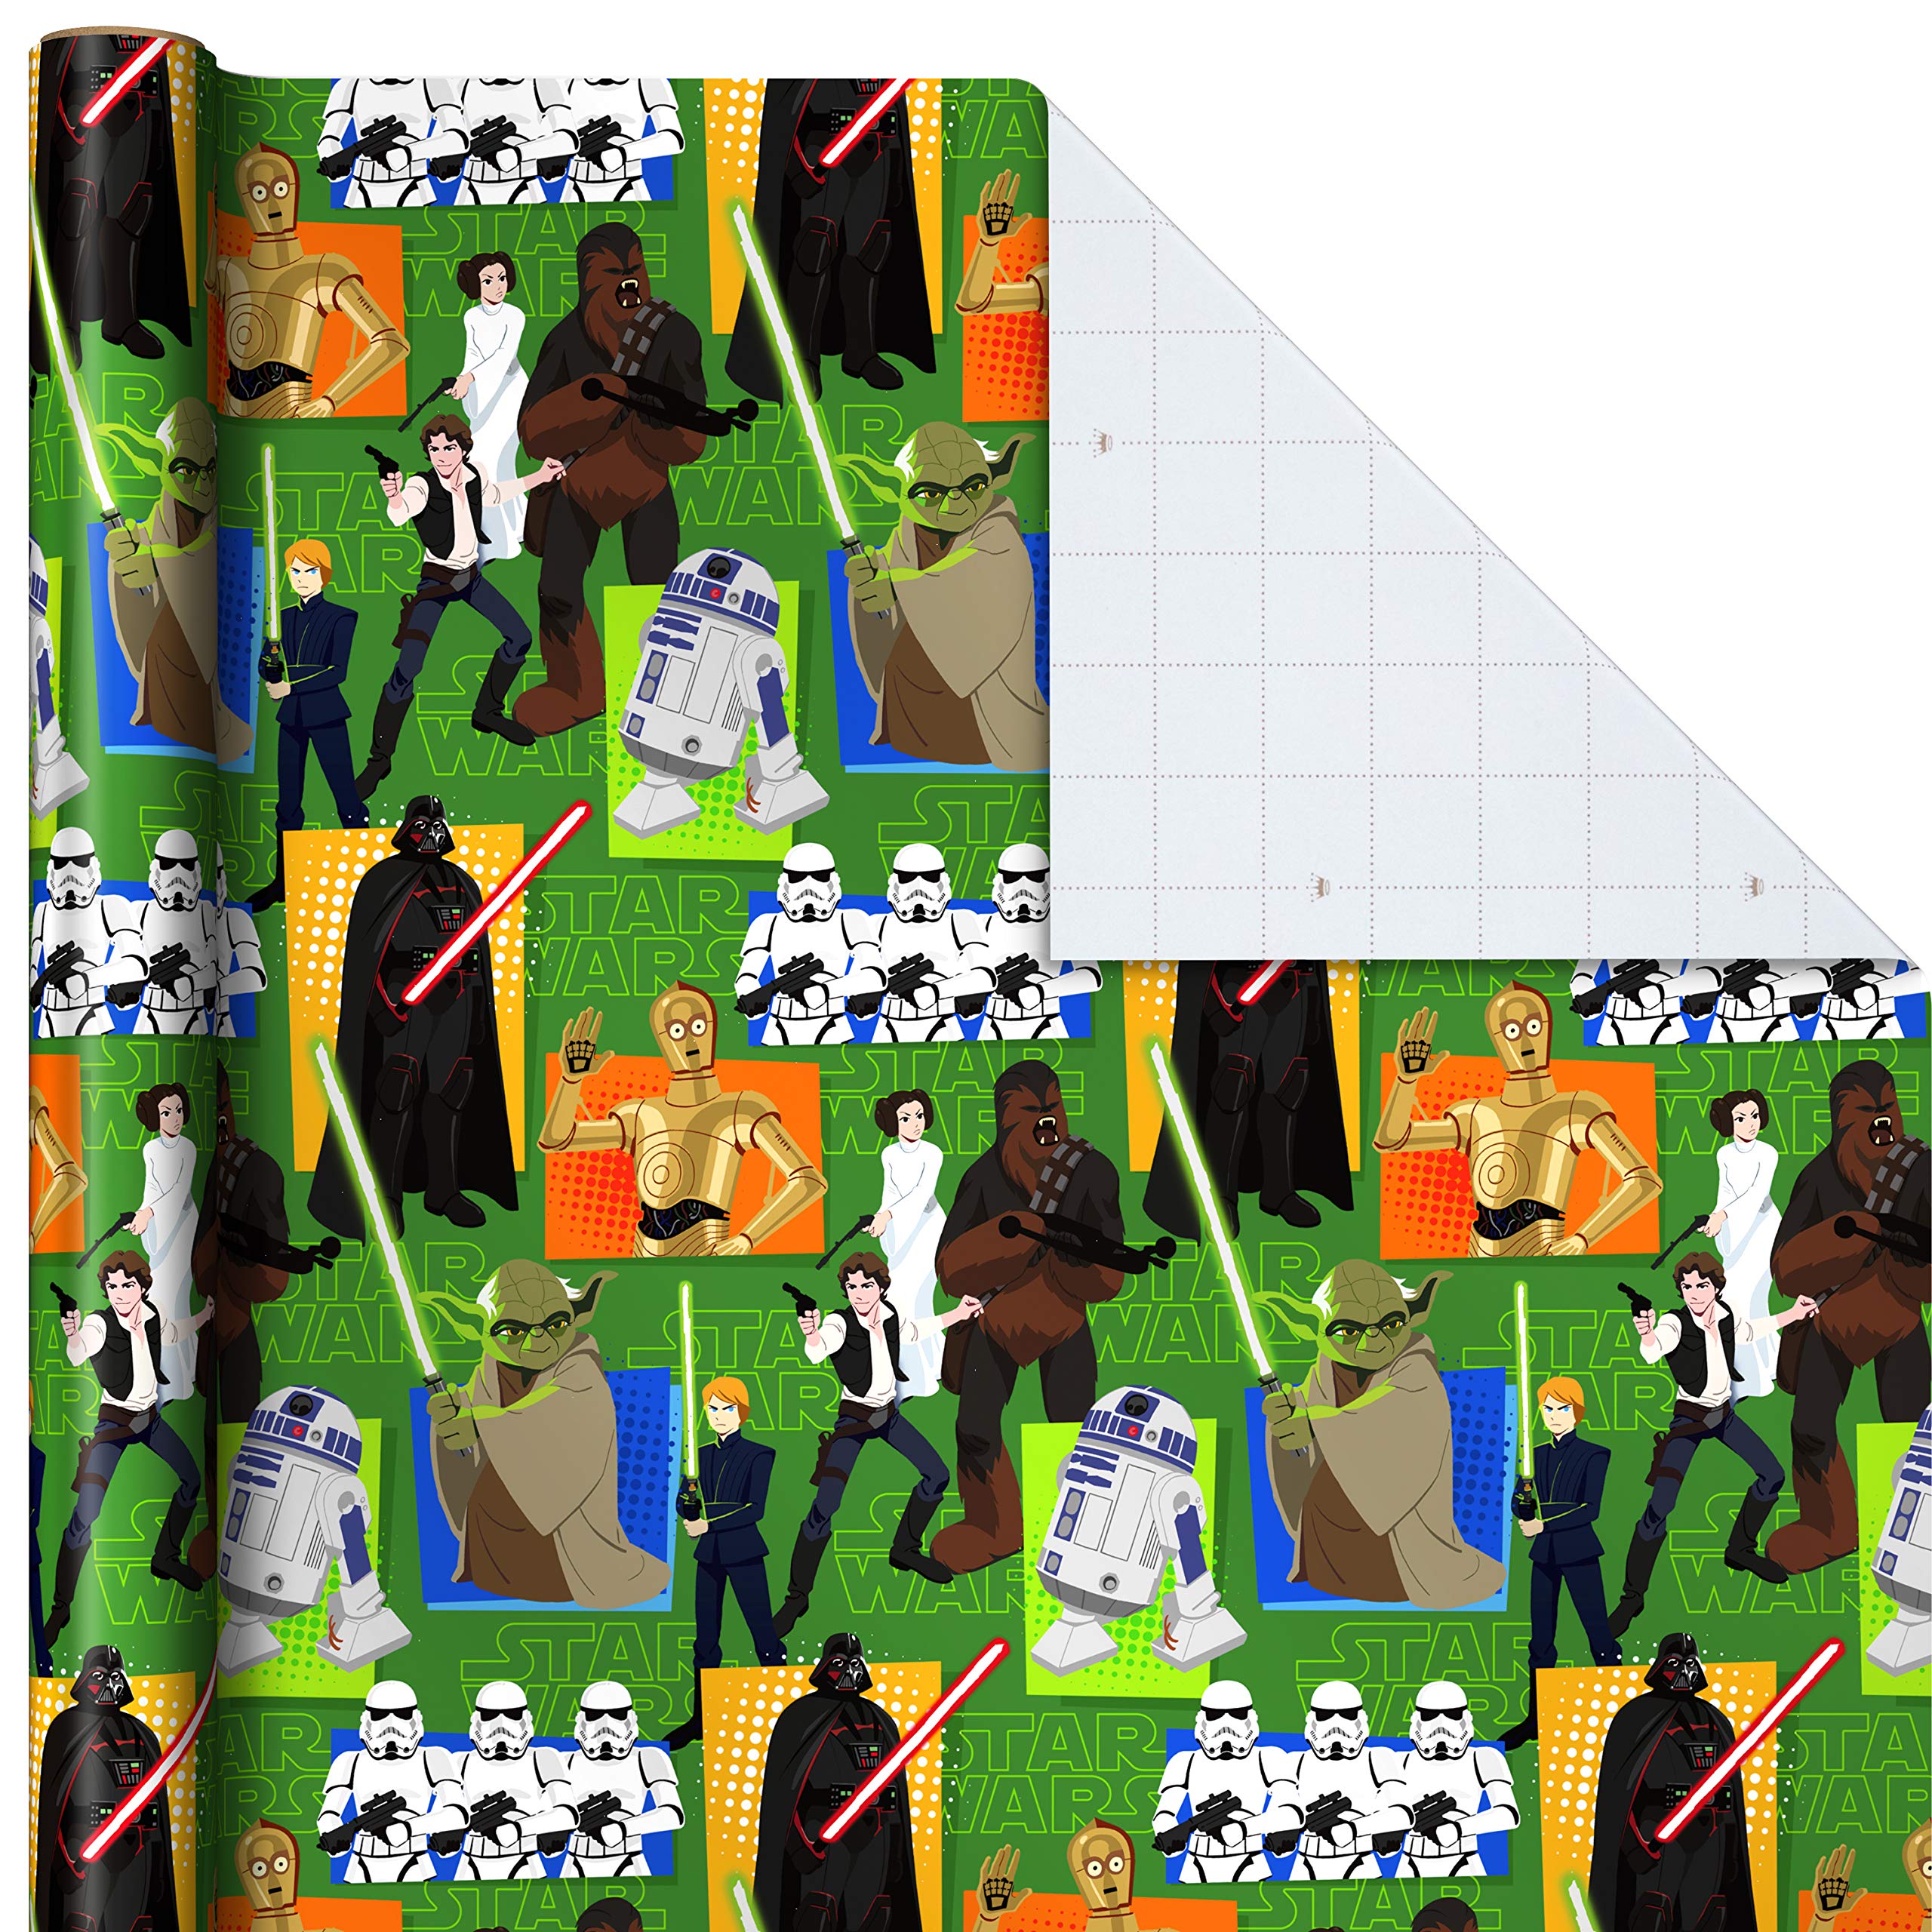 Hallmark Star Wars Wrapping Paper with Cut Lines on Reverse (3-Pack: 60 sq. ft. ttl) with Yoda, Darth Vader, Chewbacca, R2-D2, C-3PO, Stormtroopers, X-Wing, Millennium Falcon